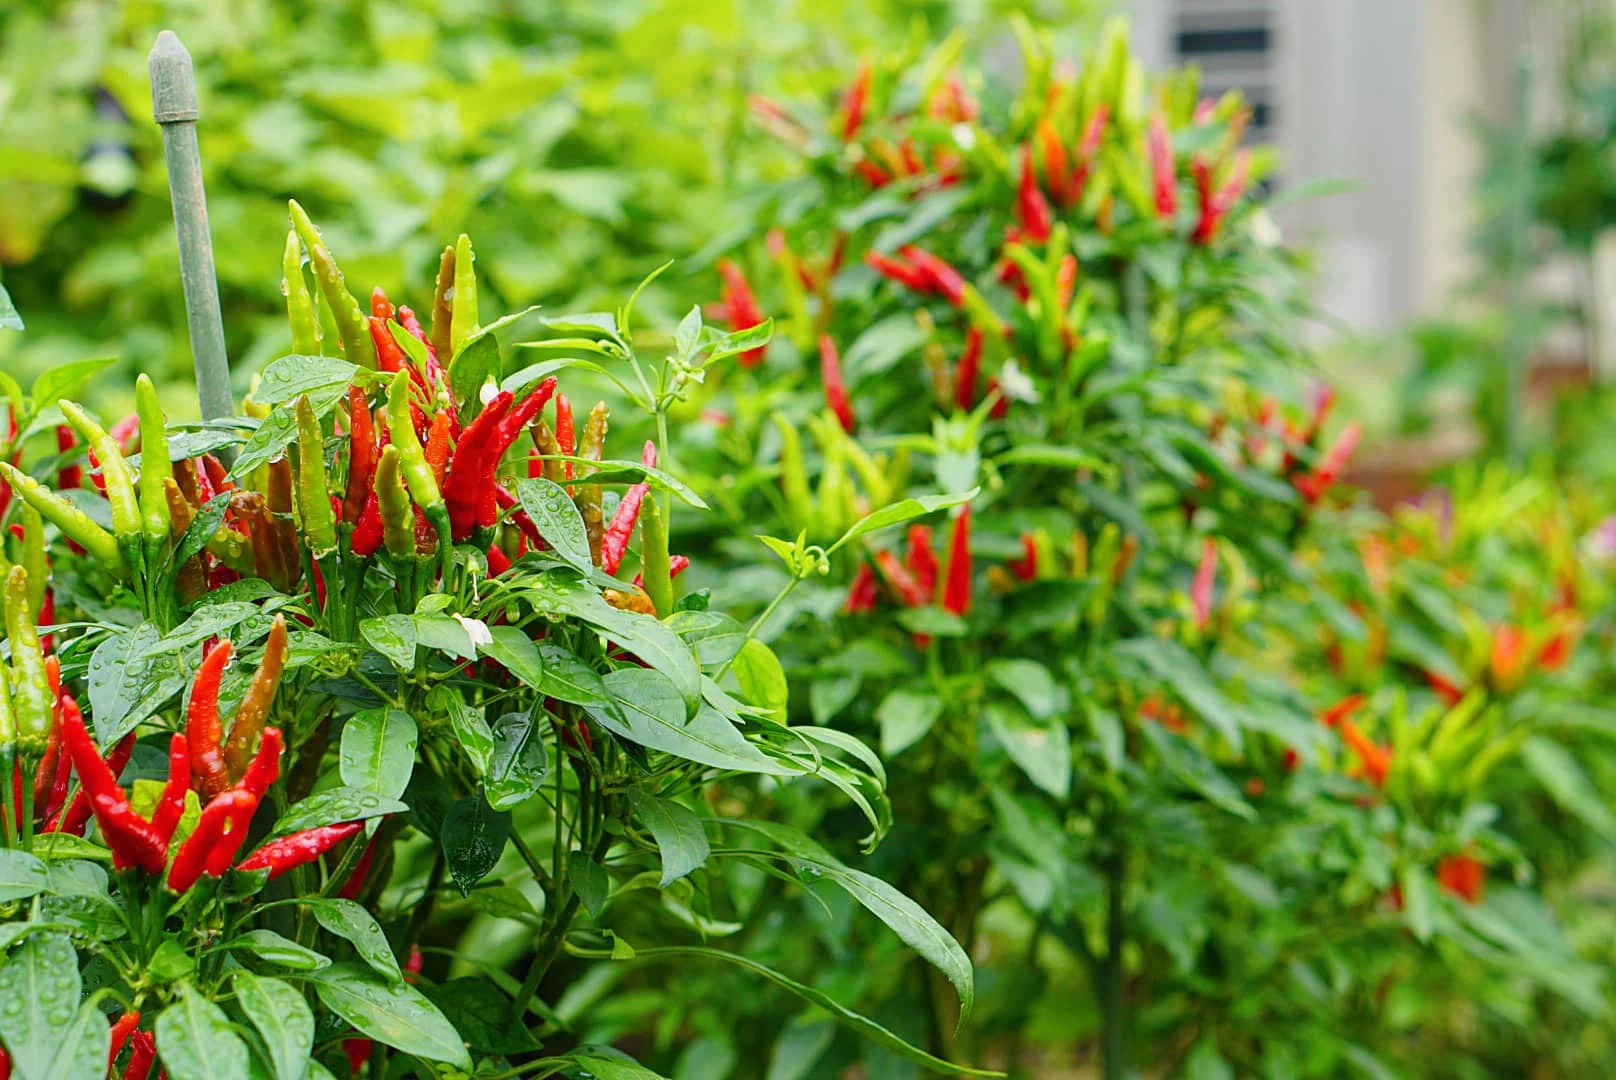 Chilli pepper exports jump 53% in Q1